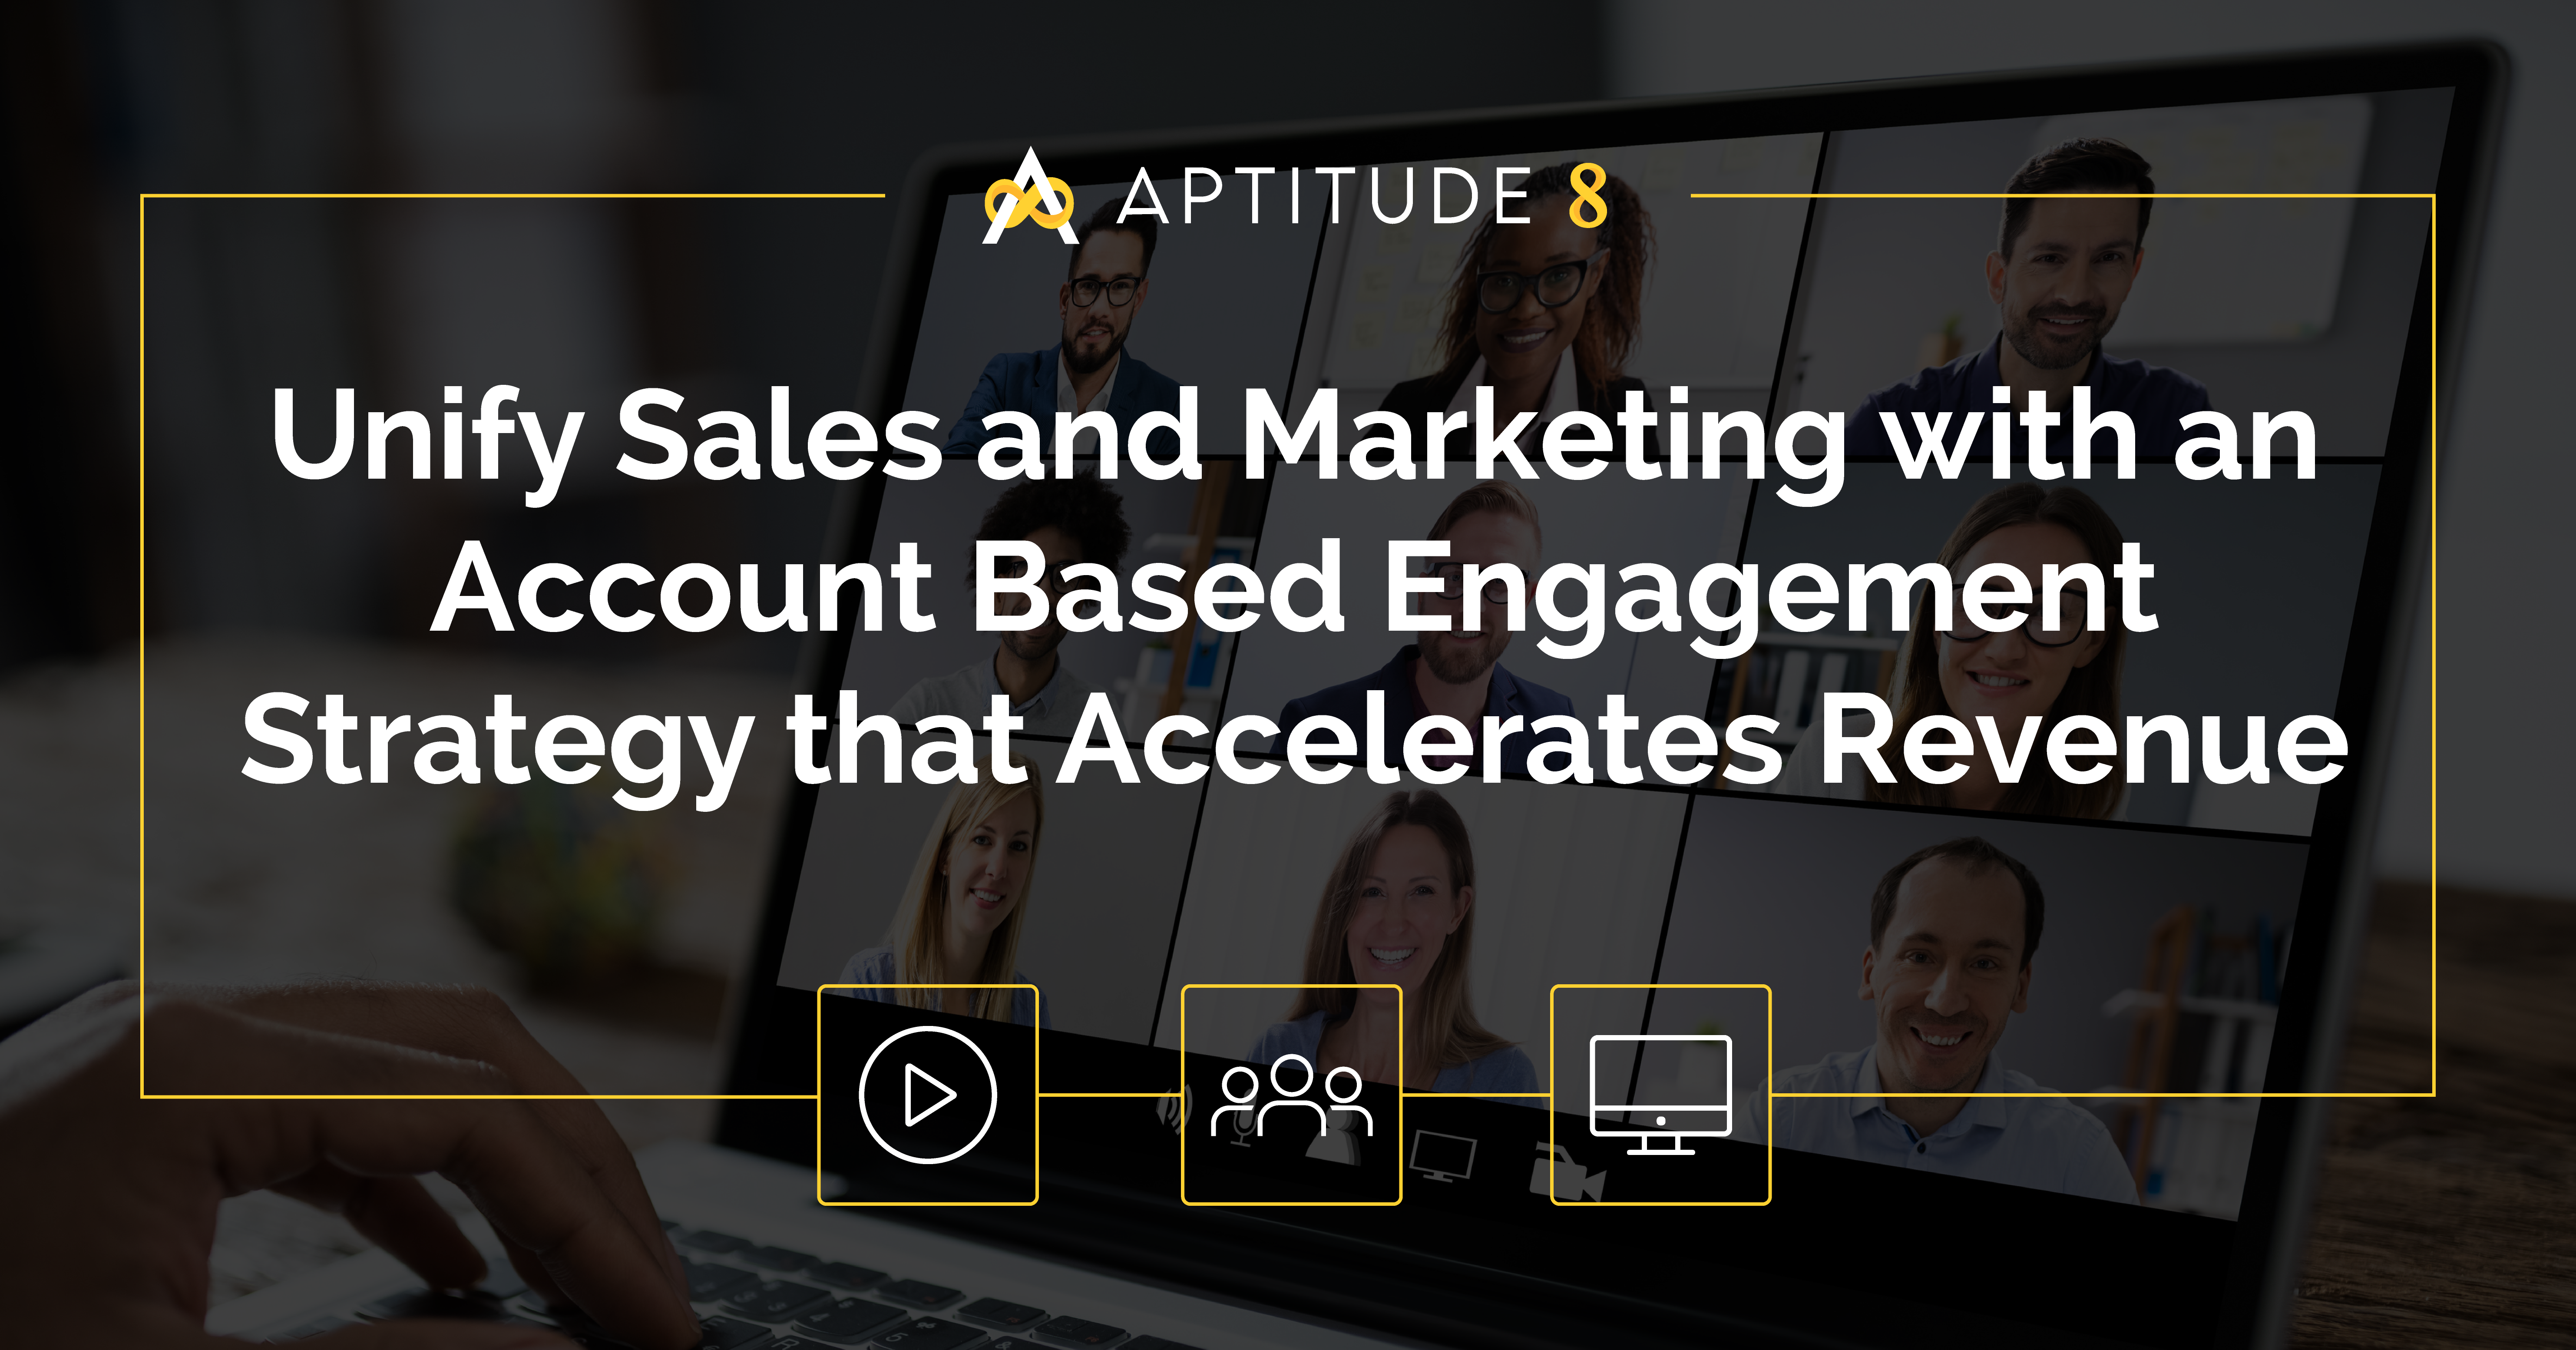 Unify Sales and Marketing using Account Based Engagement Strategy